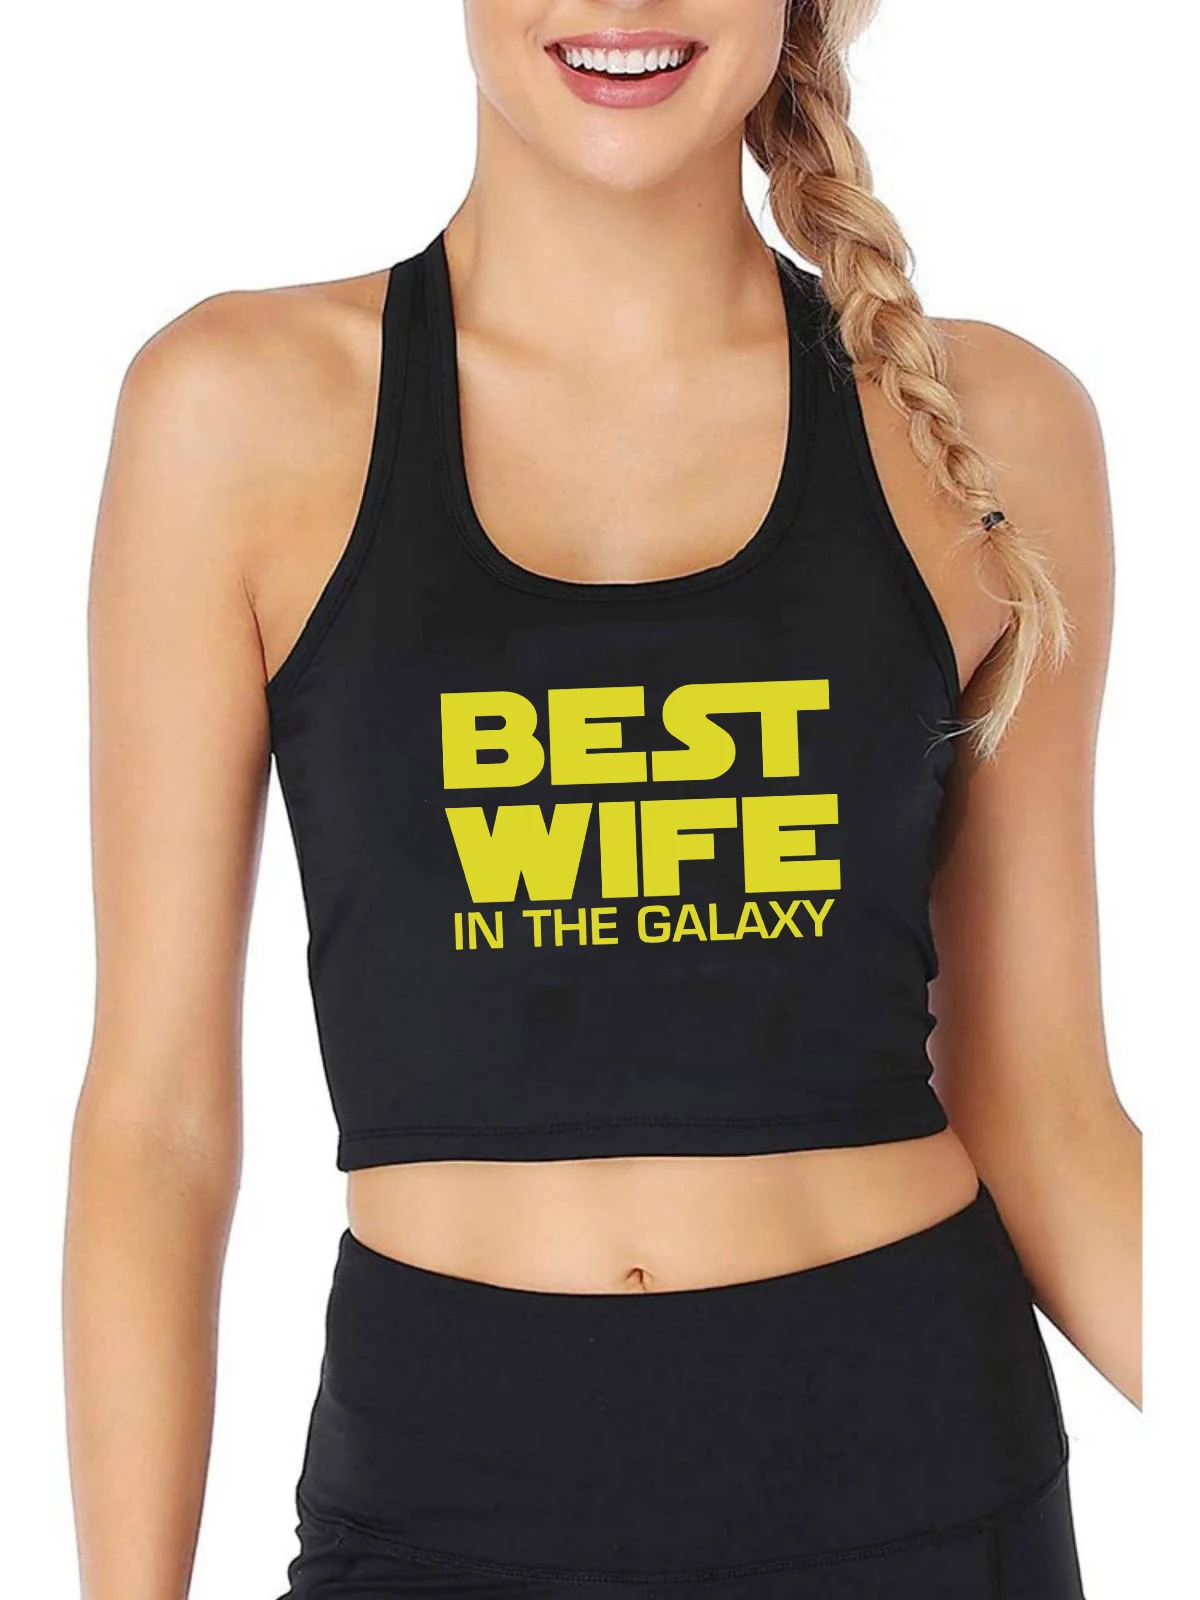 

Best Wife In The Galaxy Design Sexy Crop Top Proud Family Husband Match Hot Wife Tank Tops Gym Fitness Camisole